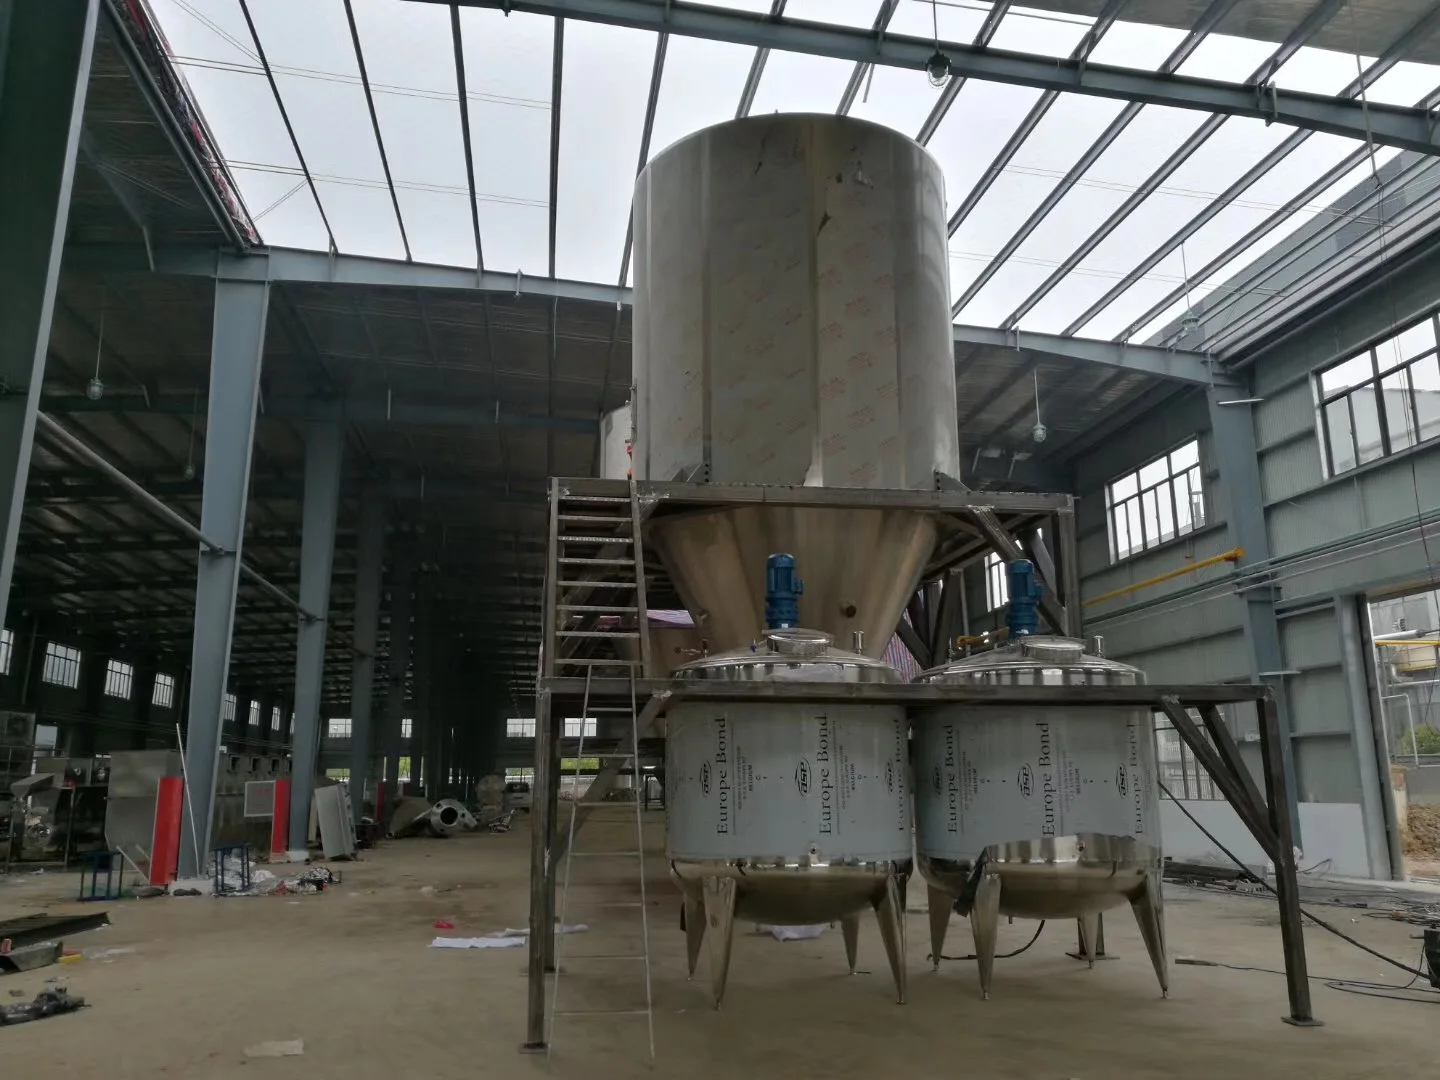 High Speed algae seaweed extract industrial centrifugal spray dryer with PLC control system